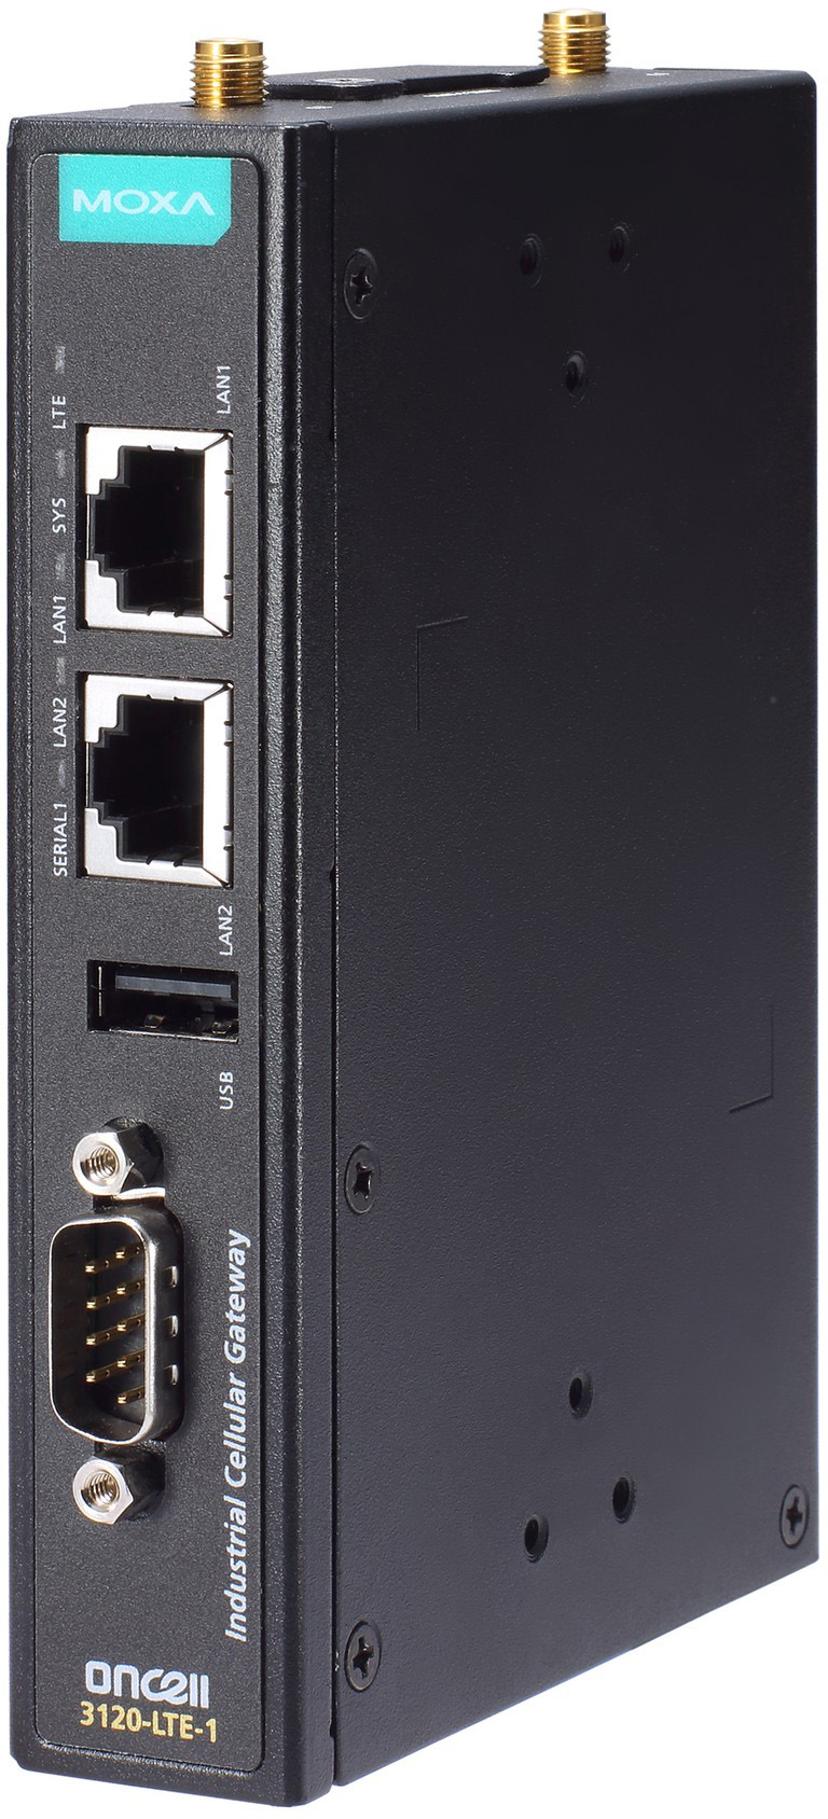 Moxa OnCell 3120-LTE-1 Industriell LTE Gateway Extrem Temp